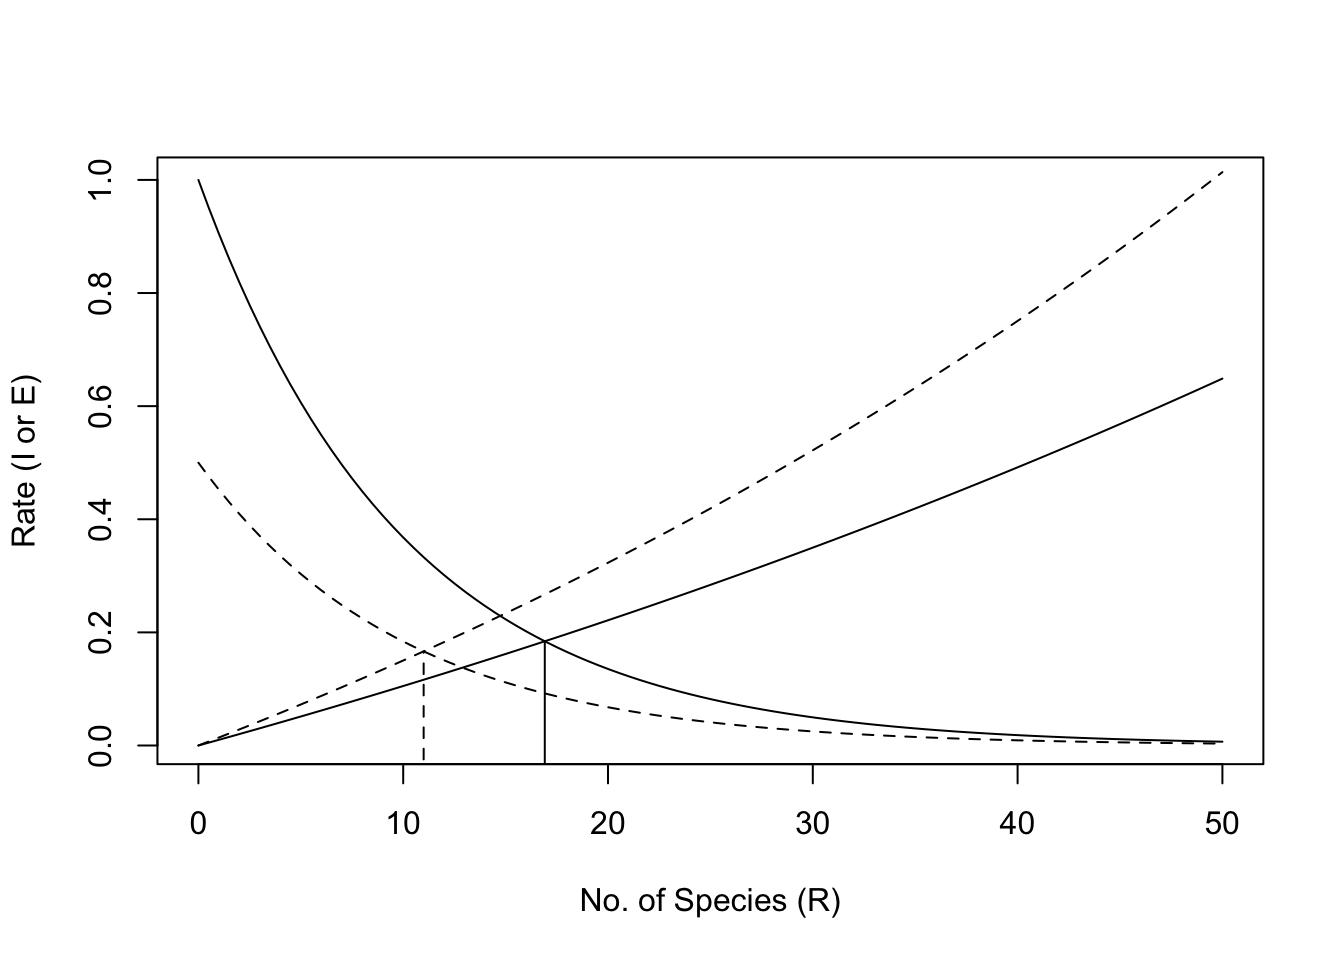 Immigration and extinction curves for the theory of island biogeography. The declining curves represent immigration rates as functions of the number of species present on an island. The increasing curves represent extinction rates, also as functions of island richness. See text for discussion of the heights of these curves, i.e.,  controls on these rates. Here the dashed lines represent an island that is shrinking in size.